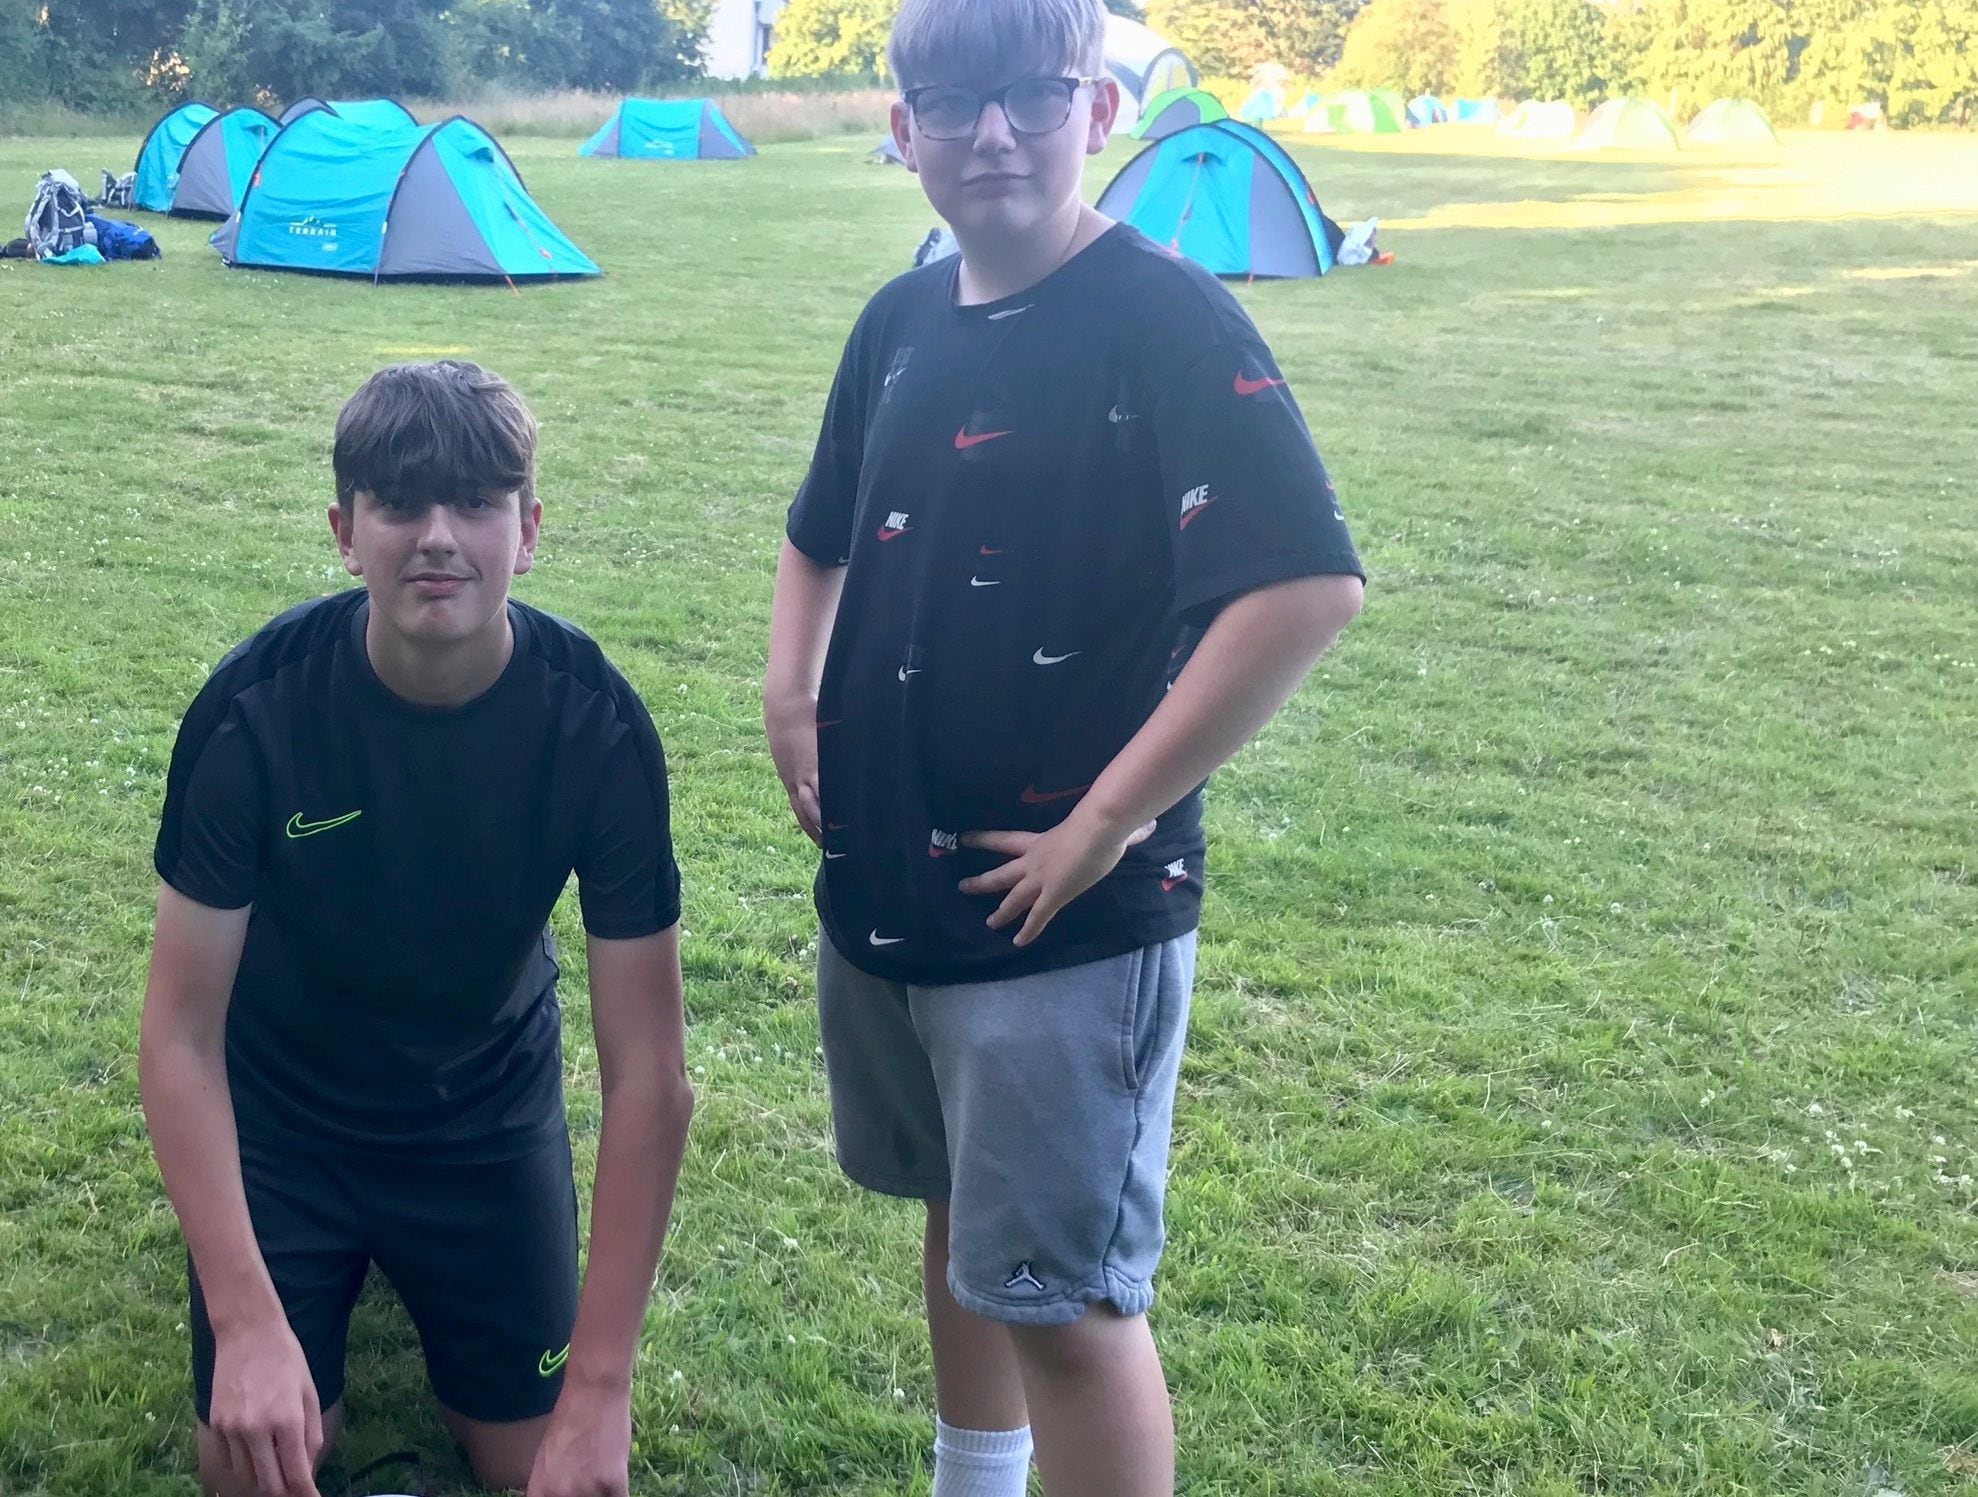 Children complete outdoor expedition after successful fundraising drive for camping equipment